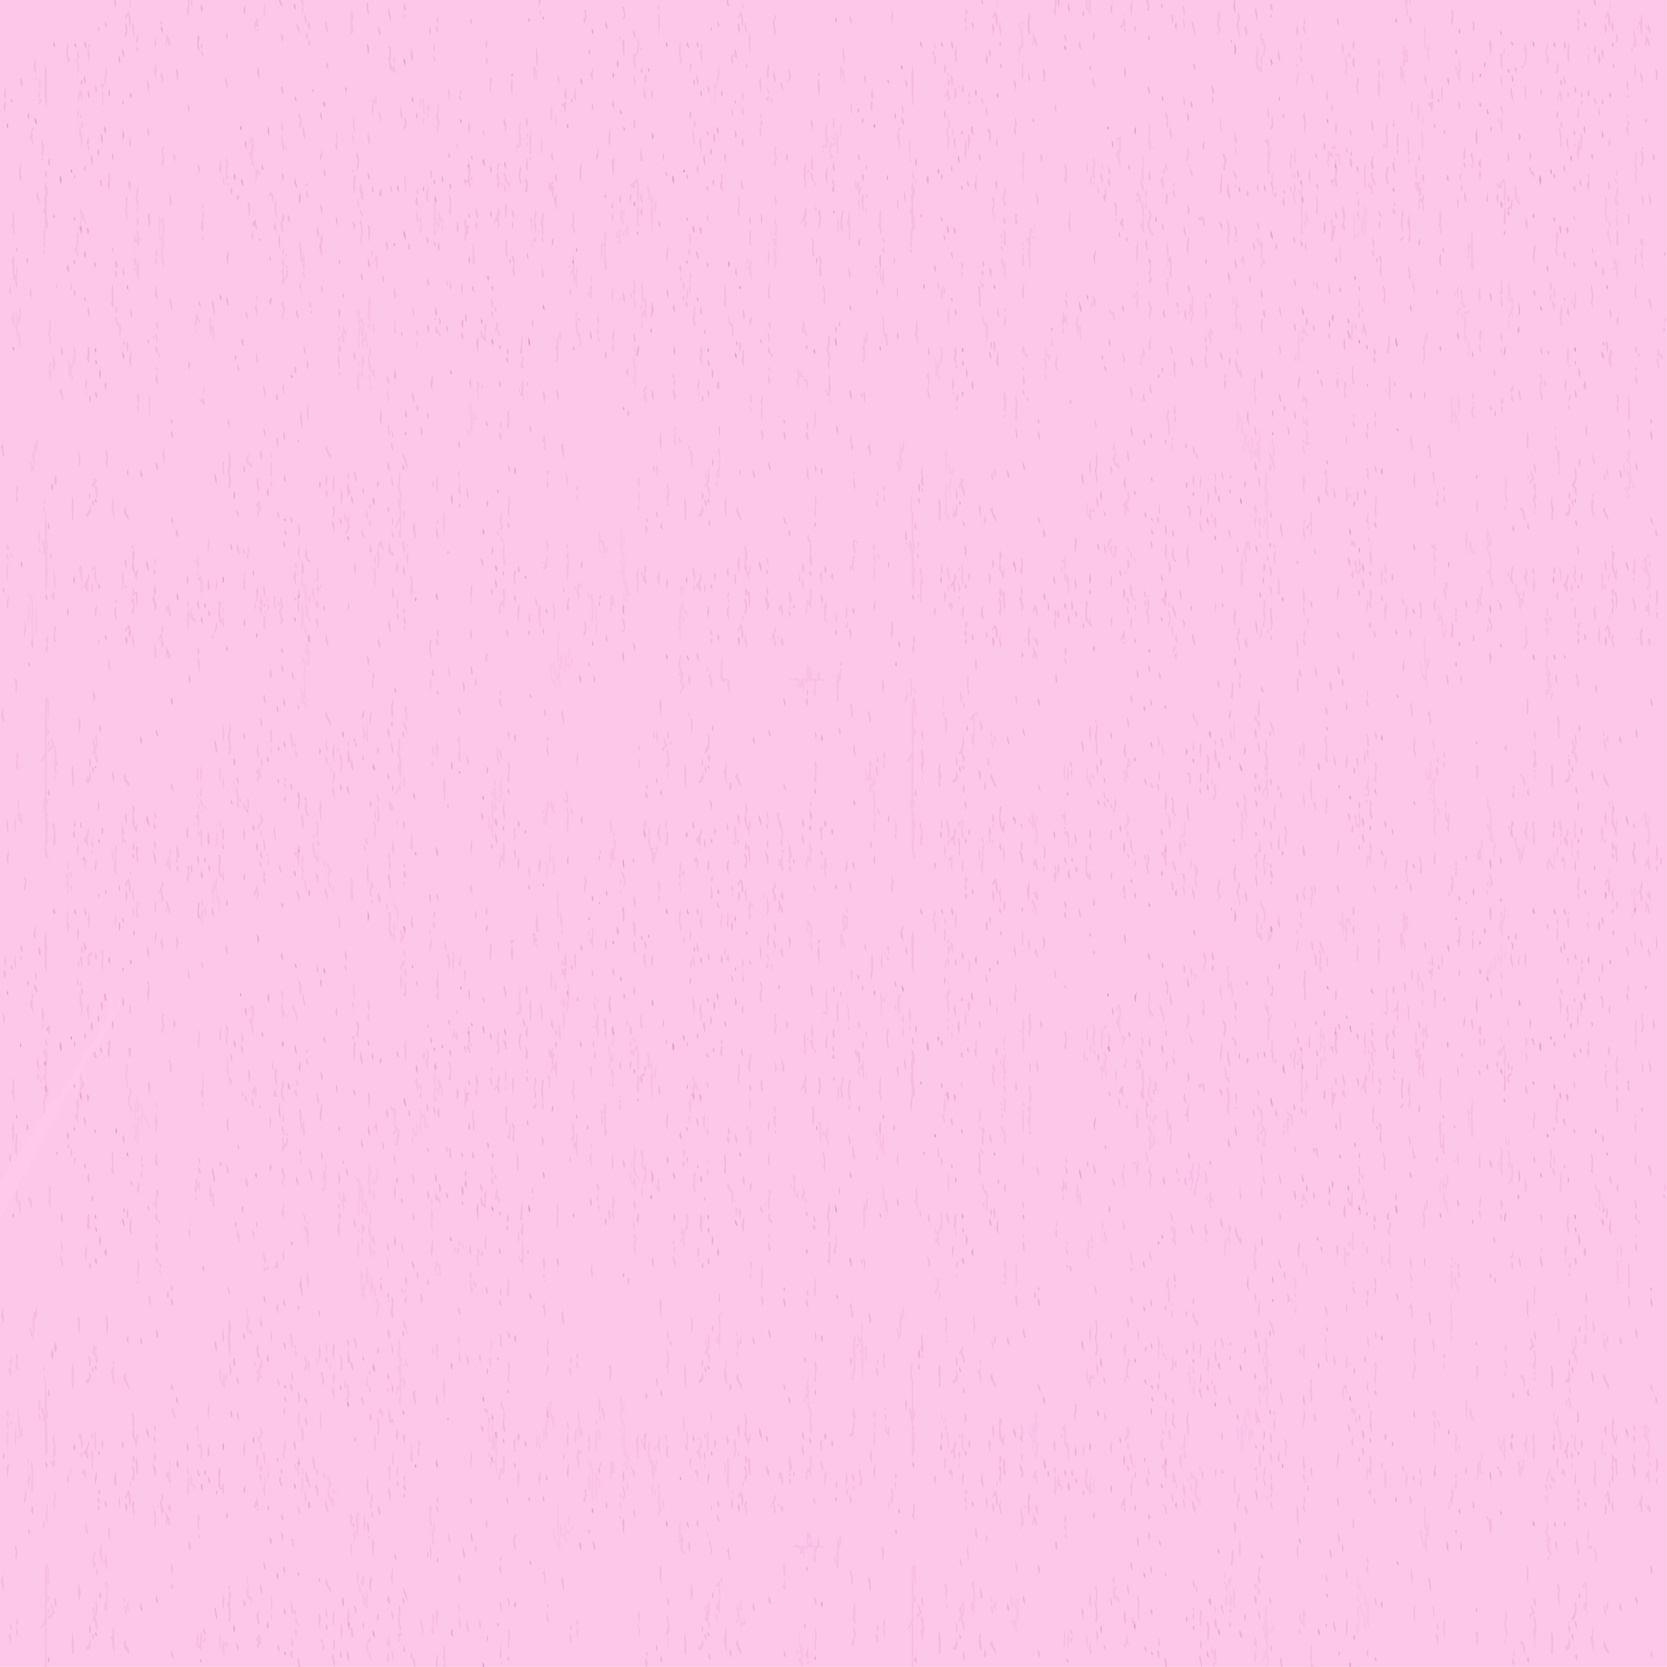 Pink Canvas Texture Abstract Background